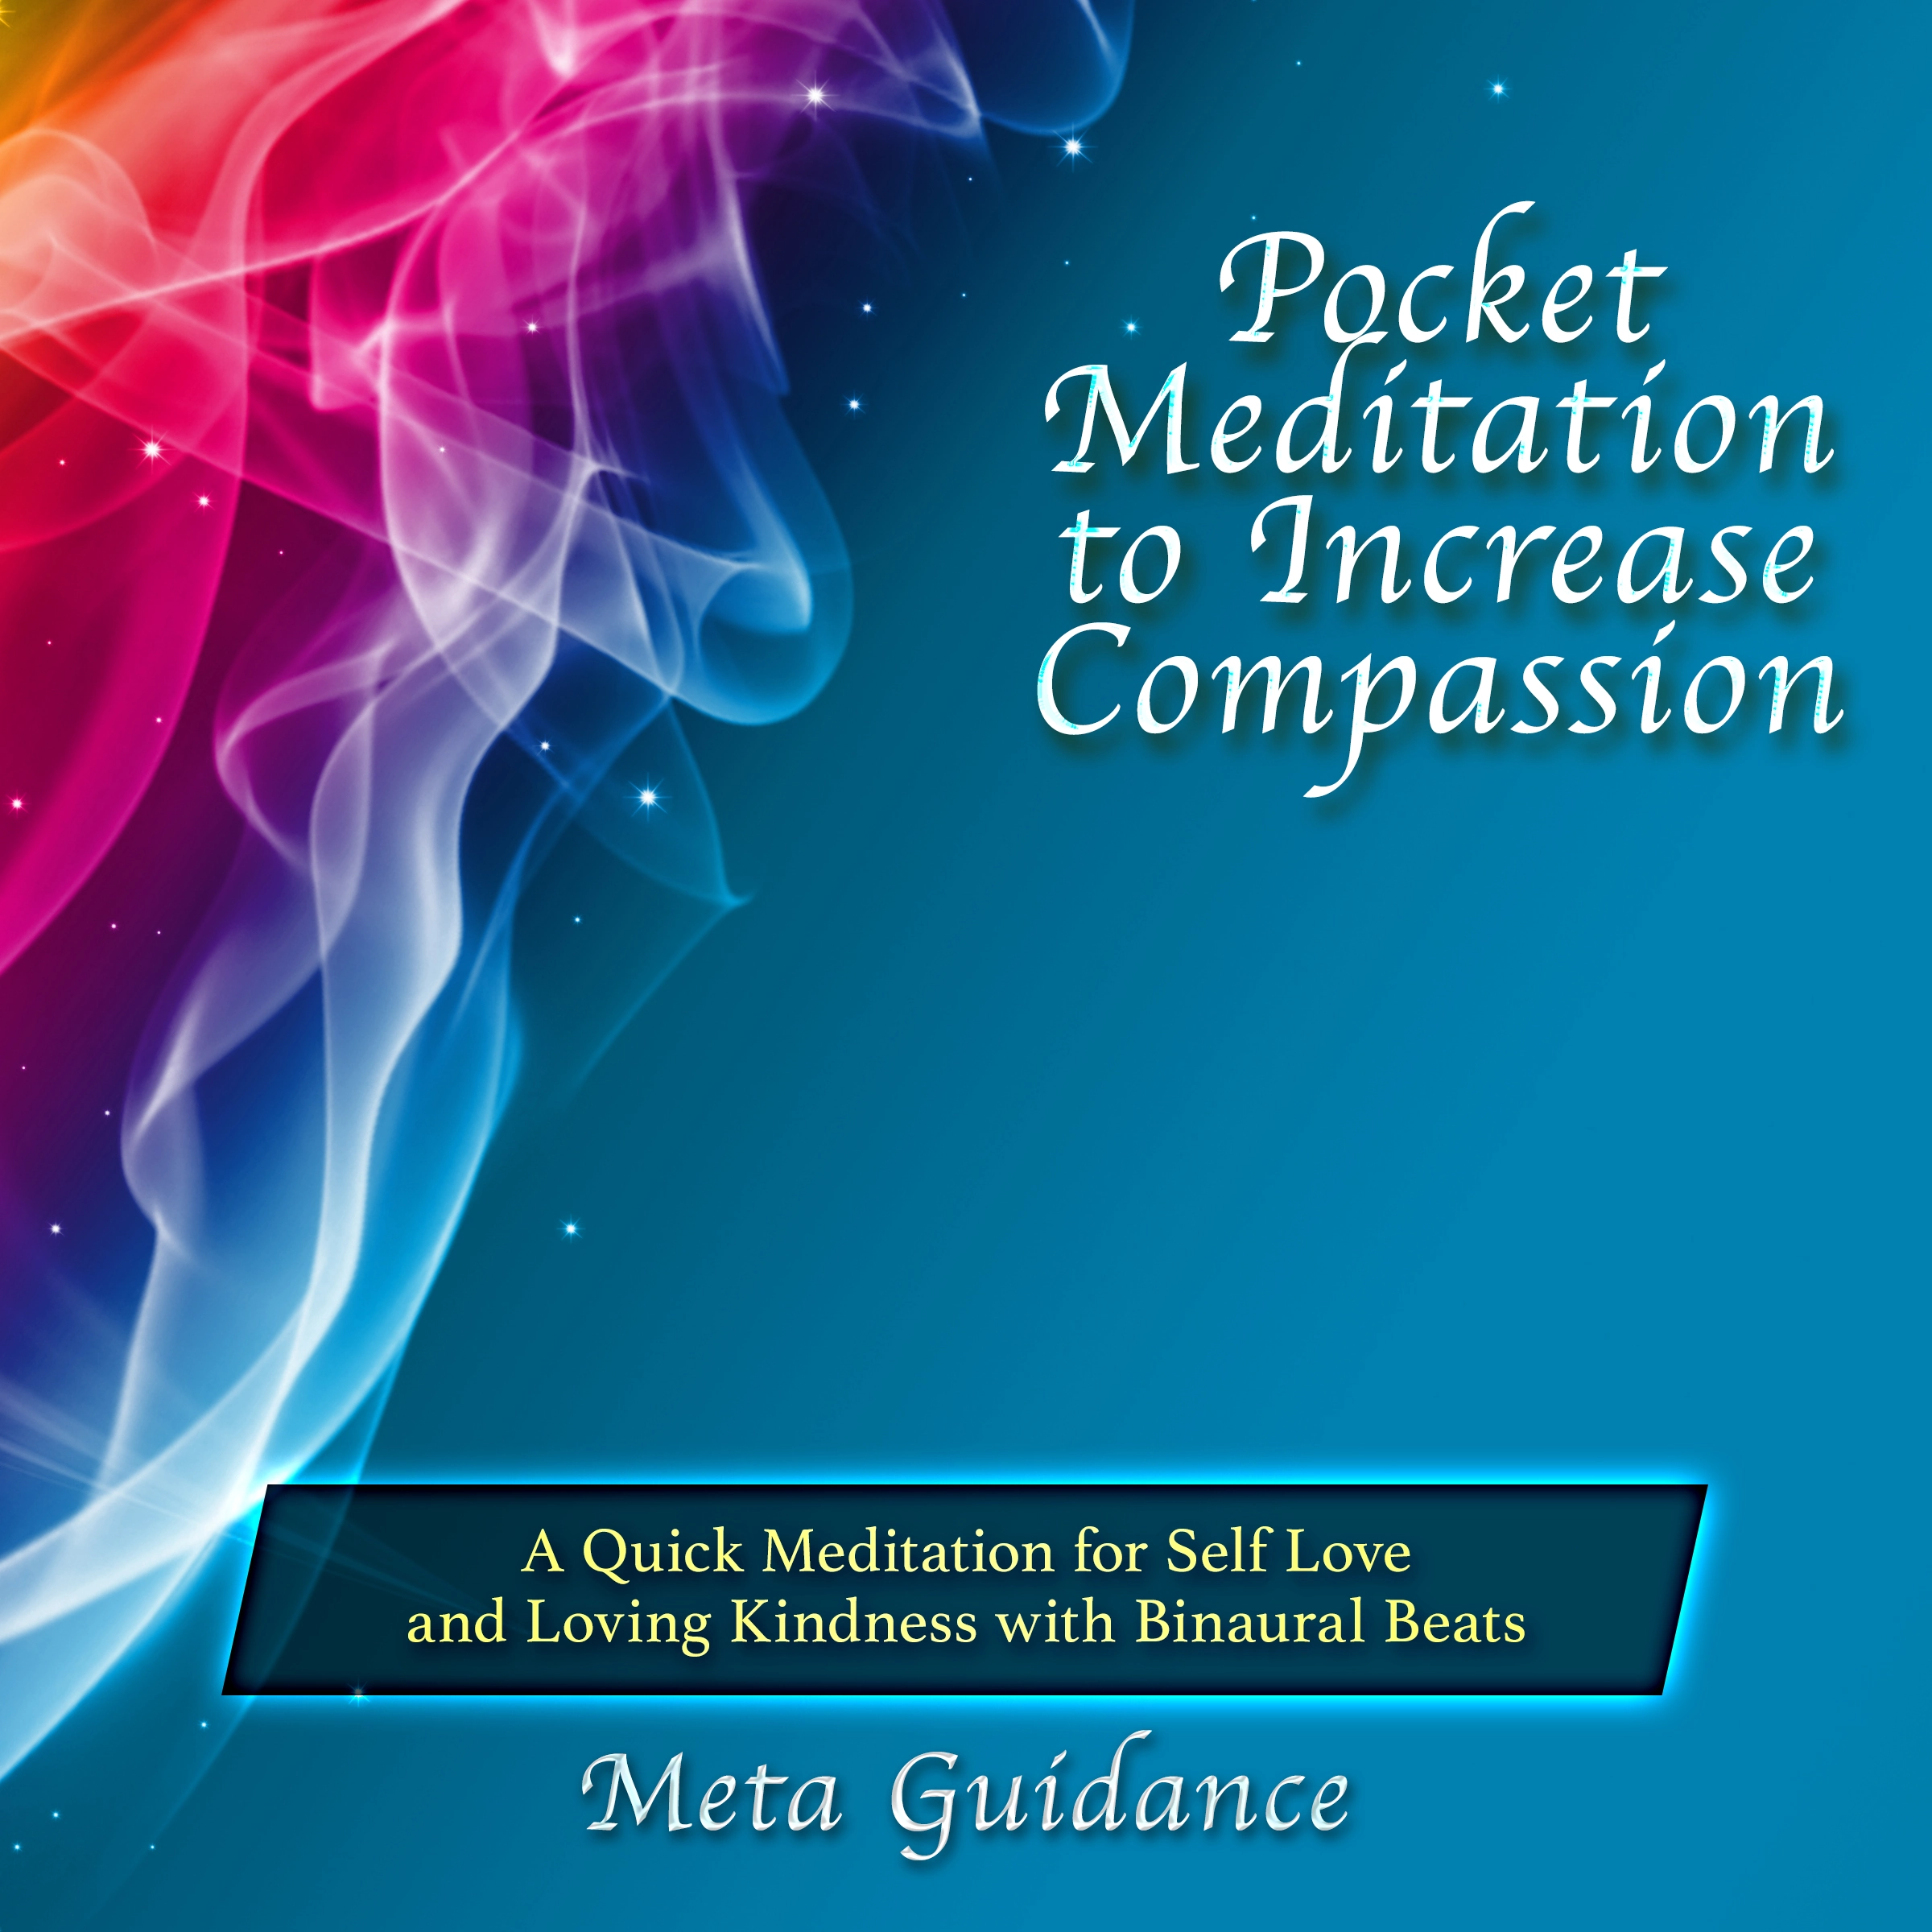 Pocket Meditation to Increase Compassion: A Quick Meditation for Self Love and Loving Kindness with Binaural Beats Audiobook by Meta Guidance